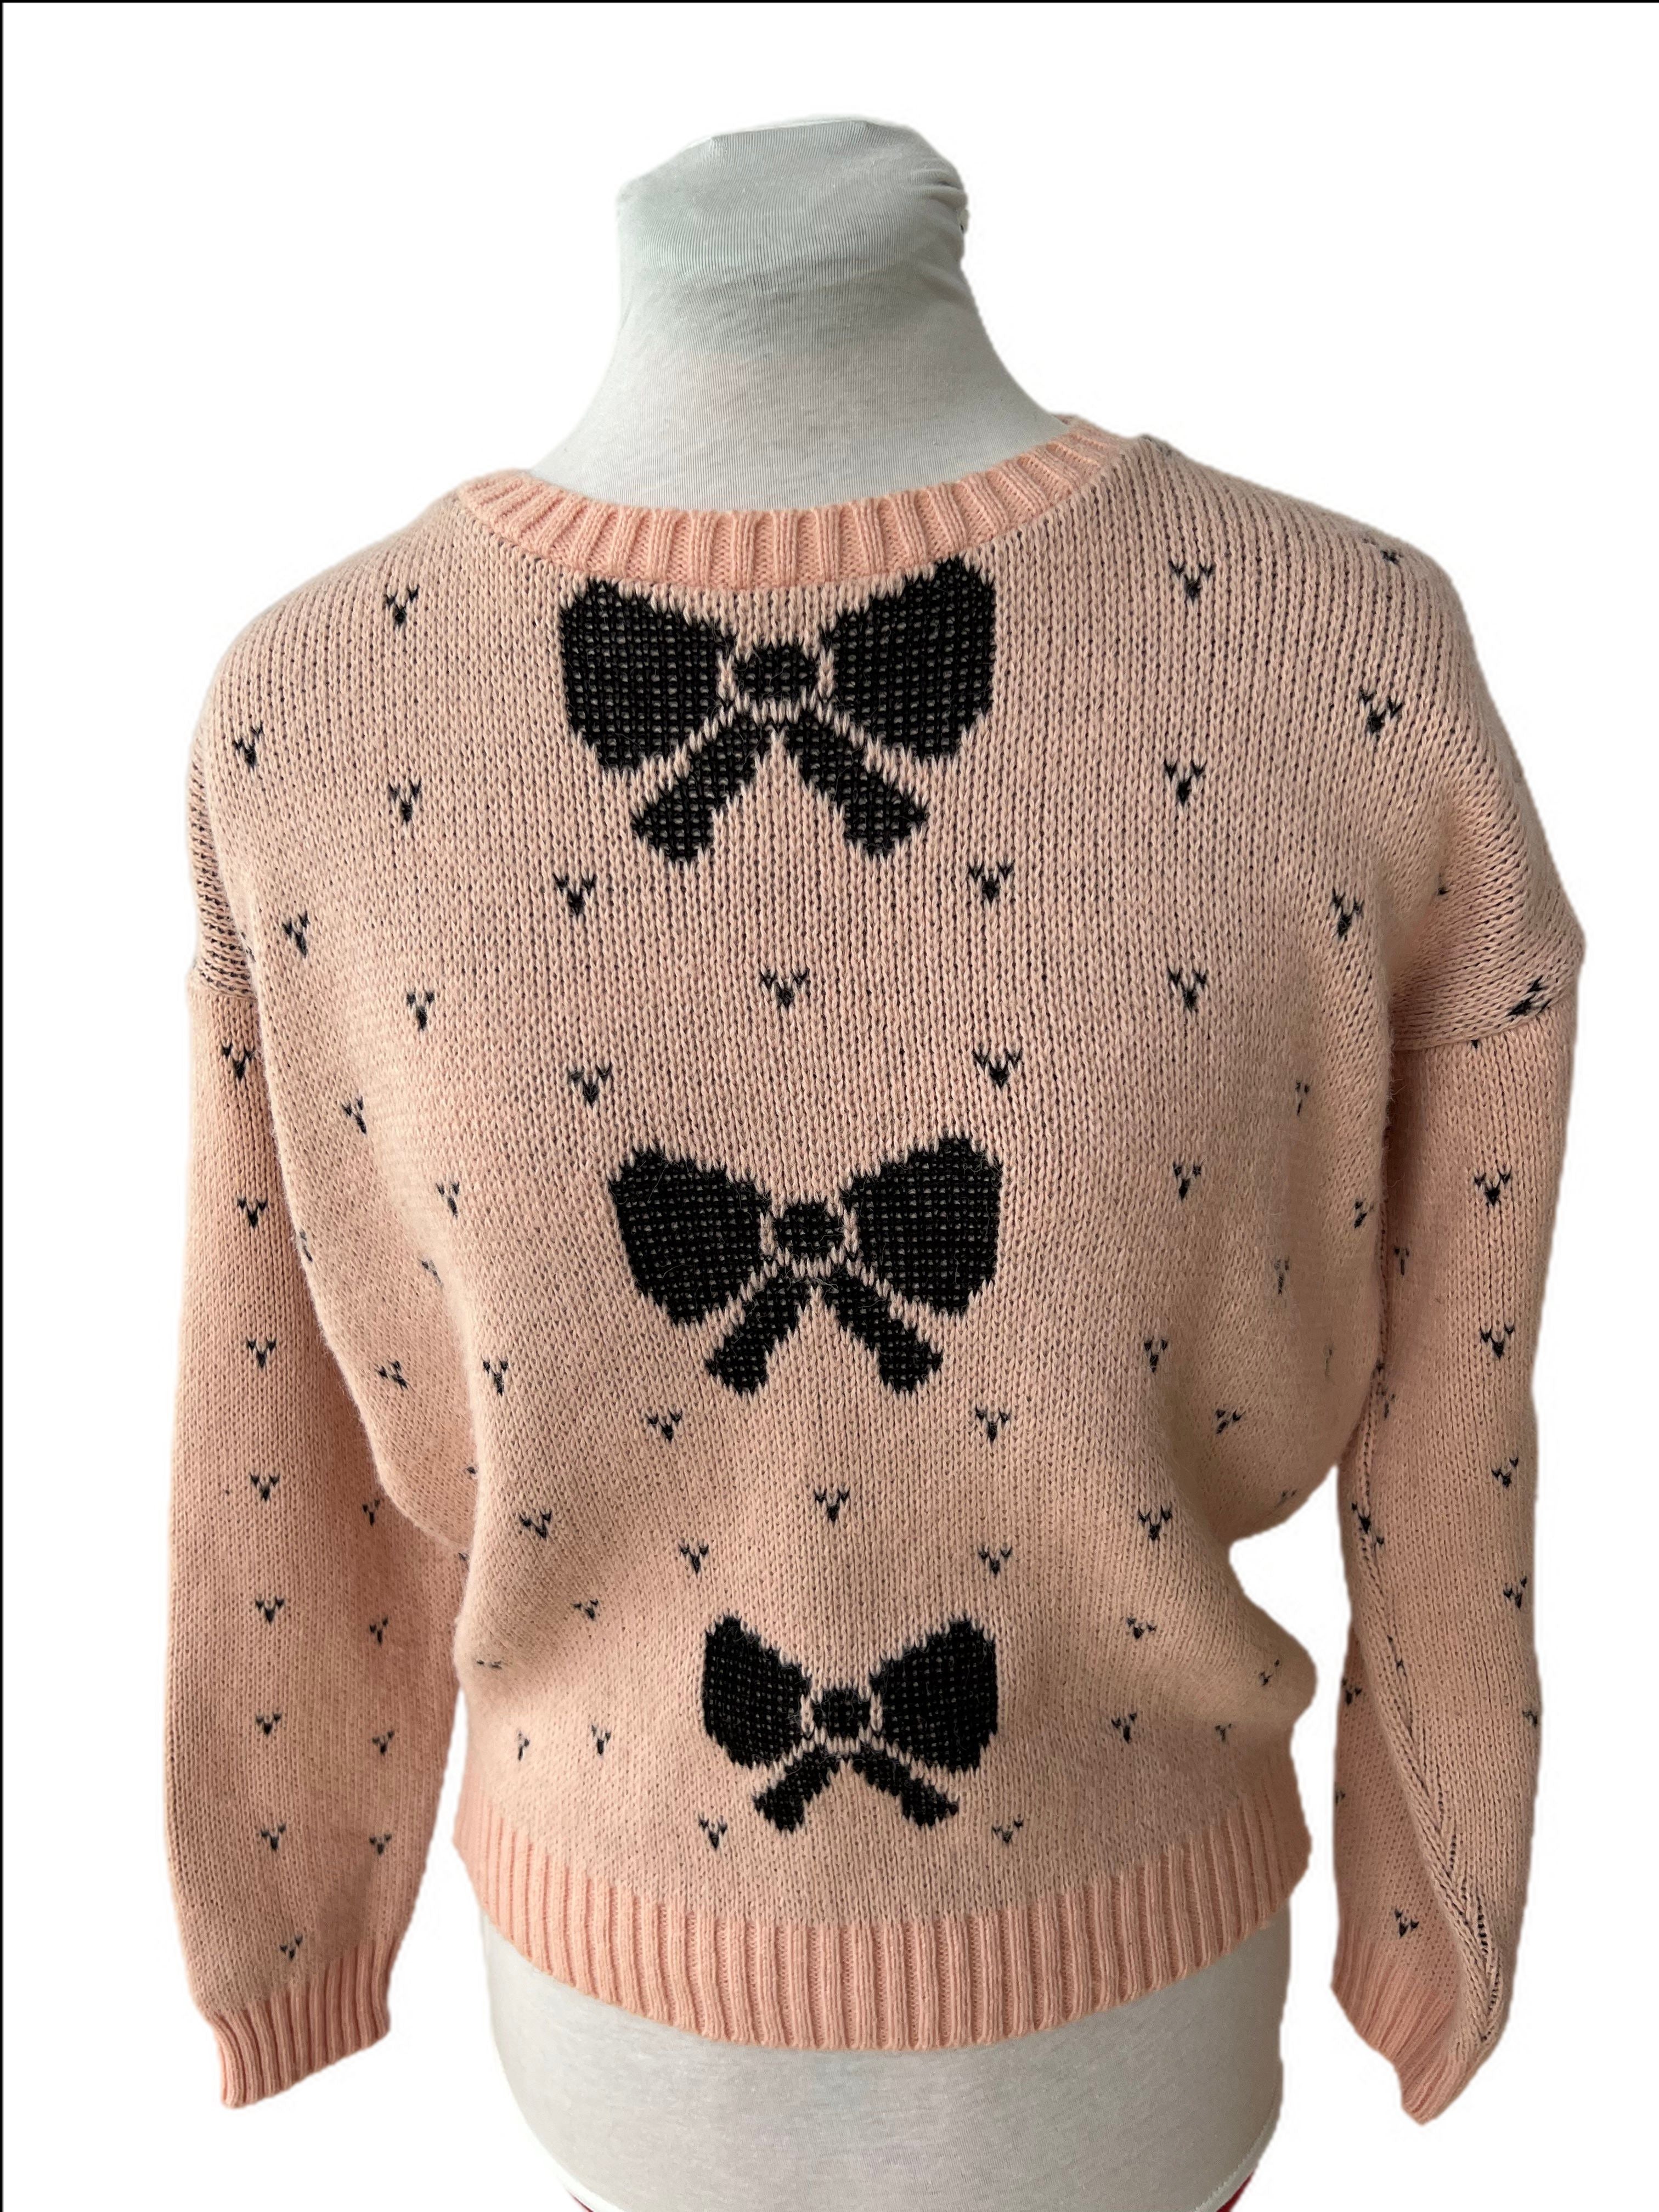 Jumper with Bow design